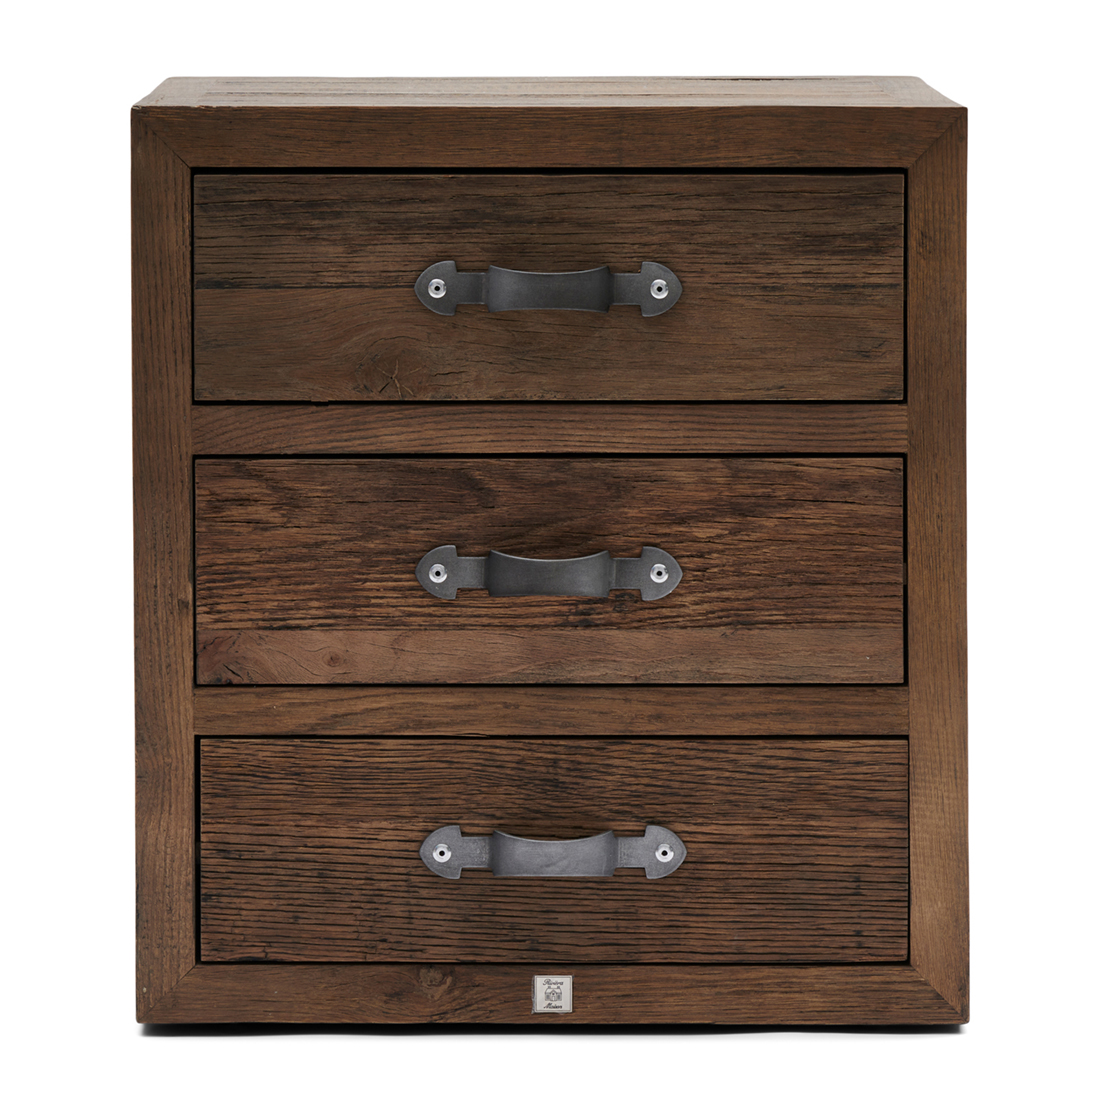 Connaught Chest of Drawers S